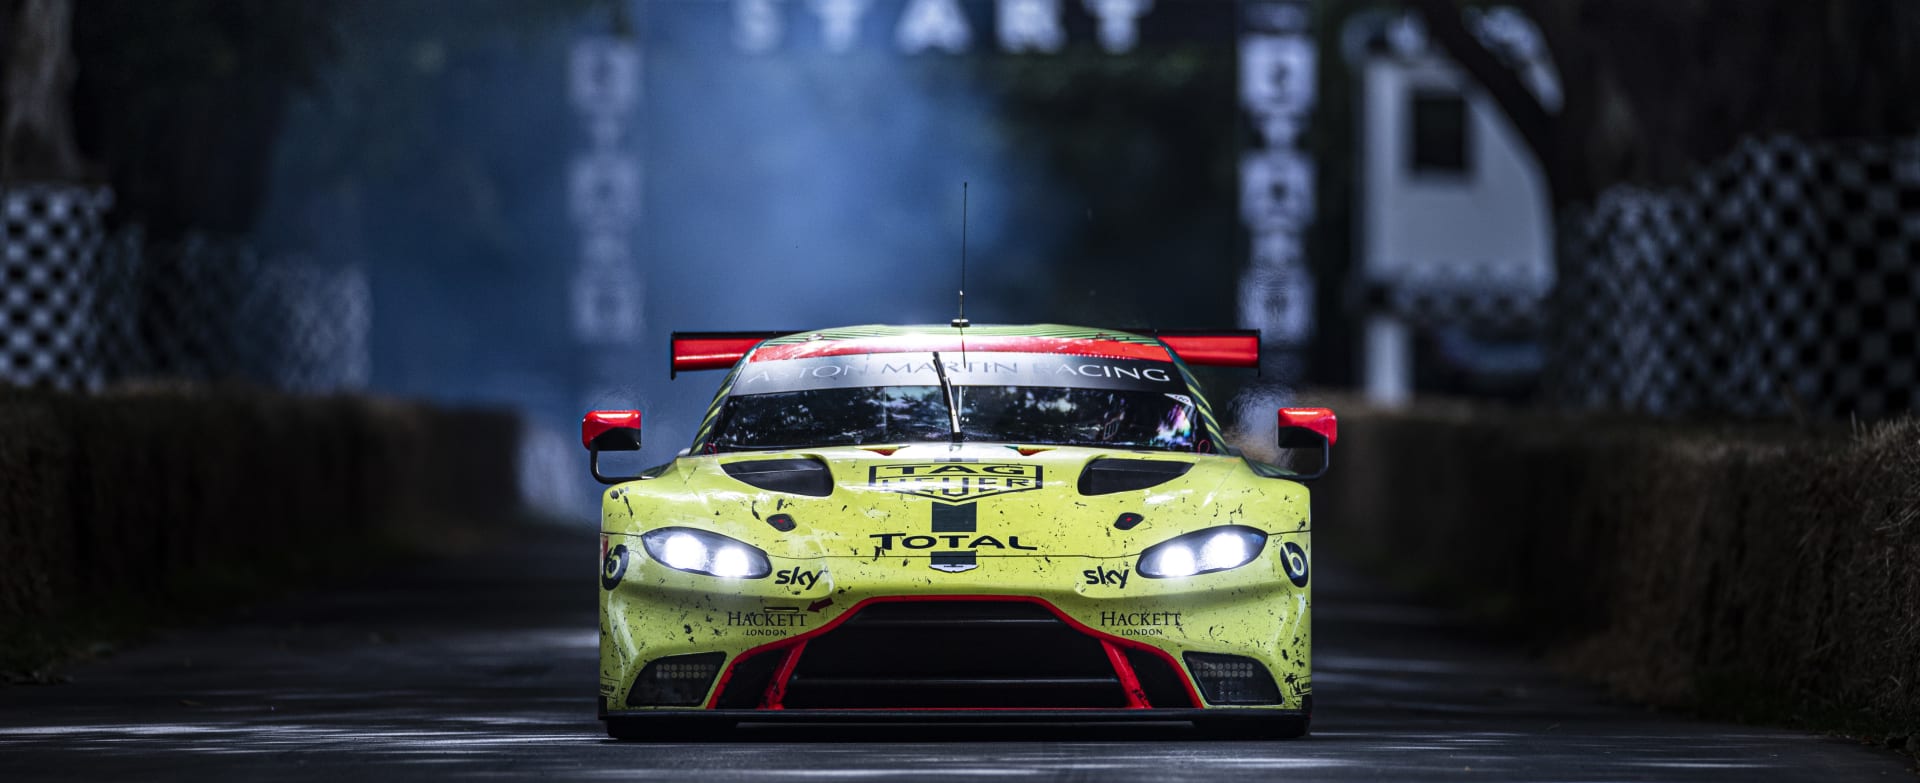 Goodwood Festival of Speed | Sunday | VIP Hospitality Packages